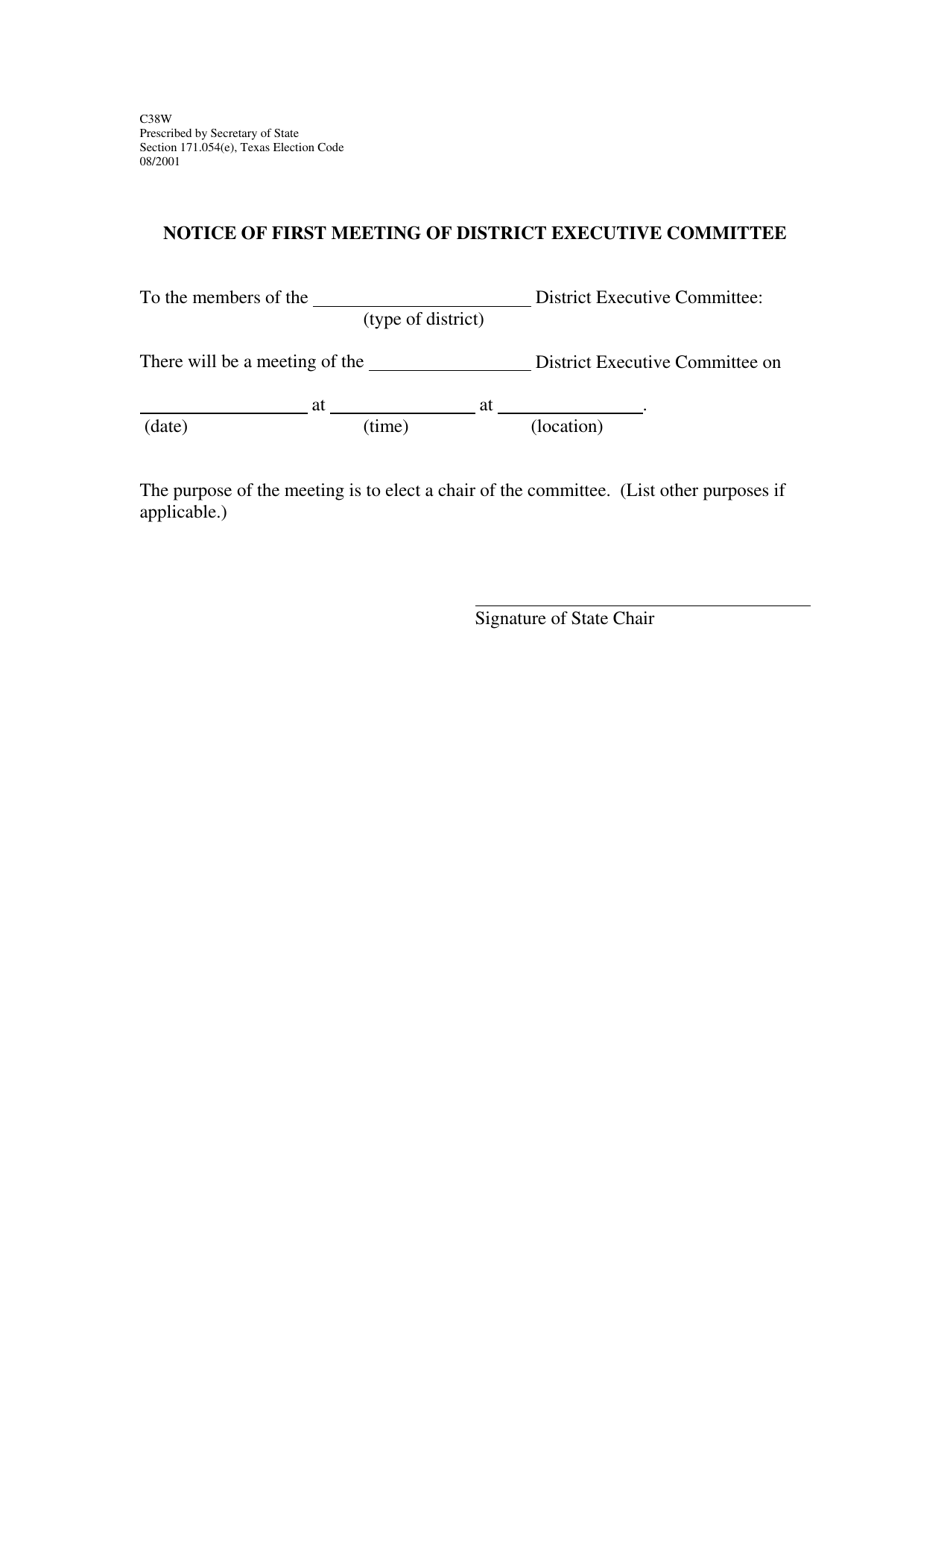 Form C38W Notice of First Meeting of District Executive Committee - Texas, Page 1